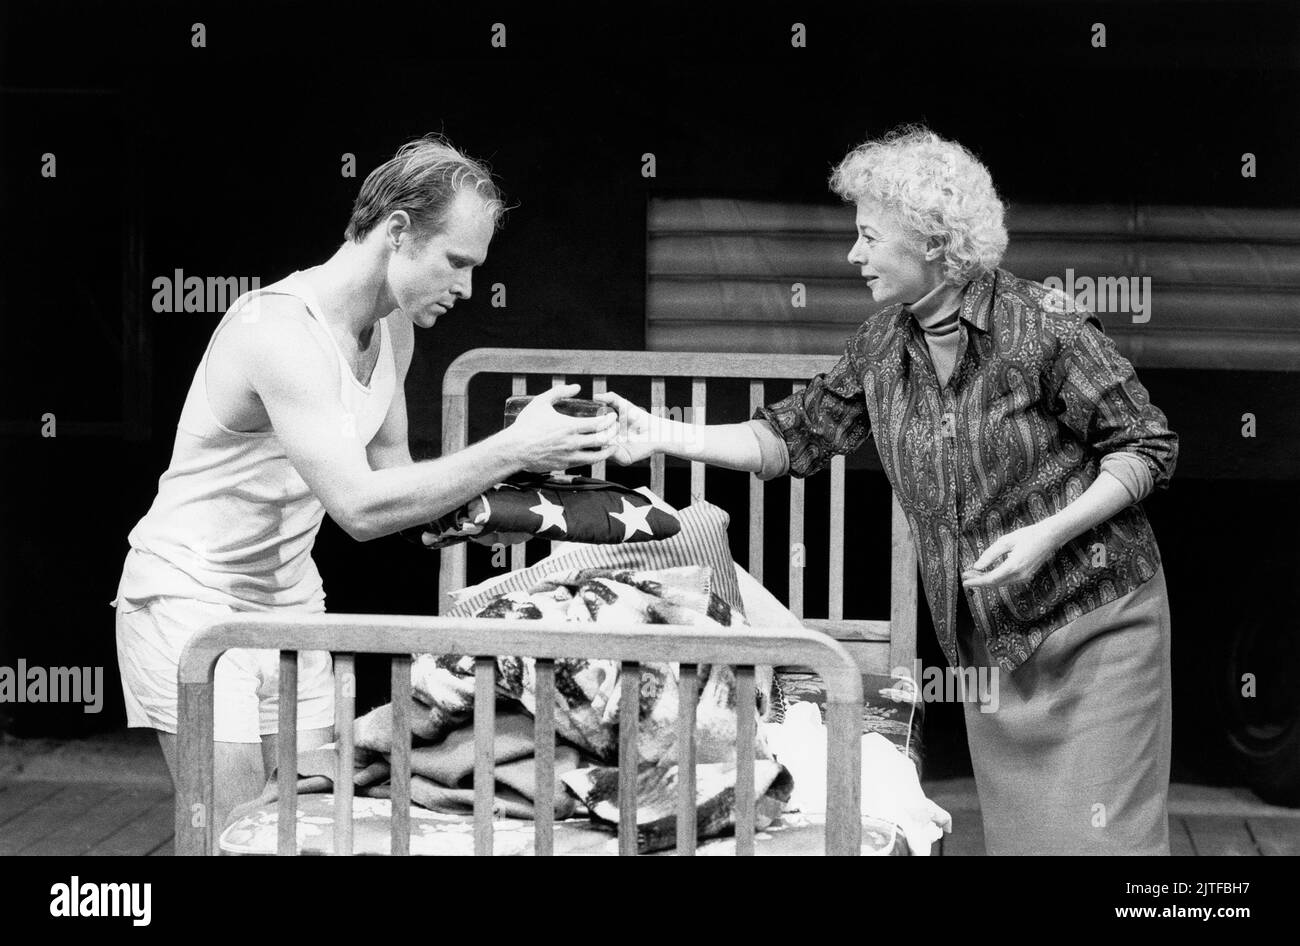 Will Patton (Jake), Geraldine McEwan (Lorraine) in A LIE OF THE MIND by Sam Shepard at the Royal Court Theatre, London SW1  14/10/1987  music: Stephen Warbeck  design: Paul Brown  lighting: Christopher Toulmin  director: Simon Curtis Stock Photo